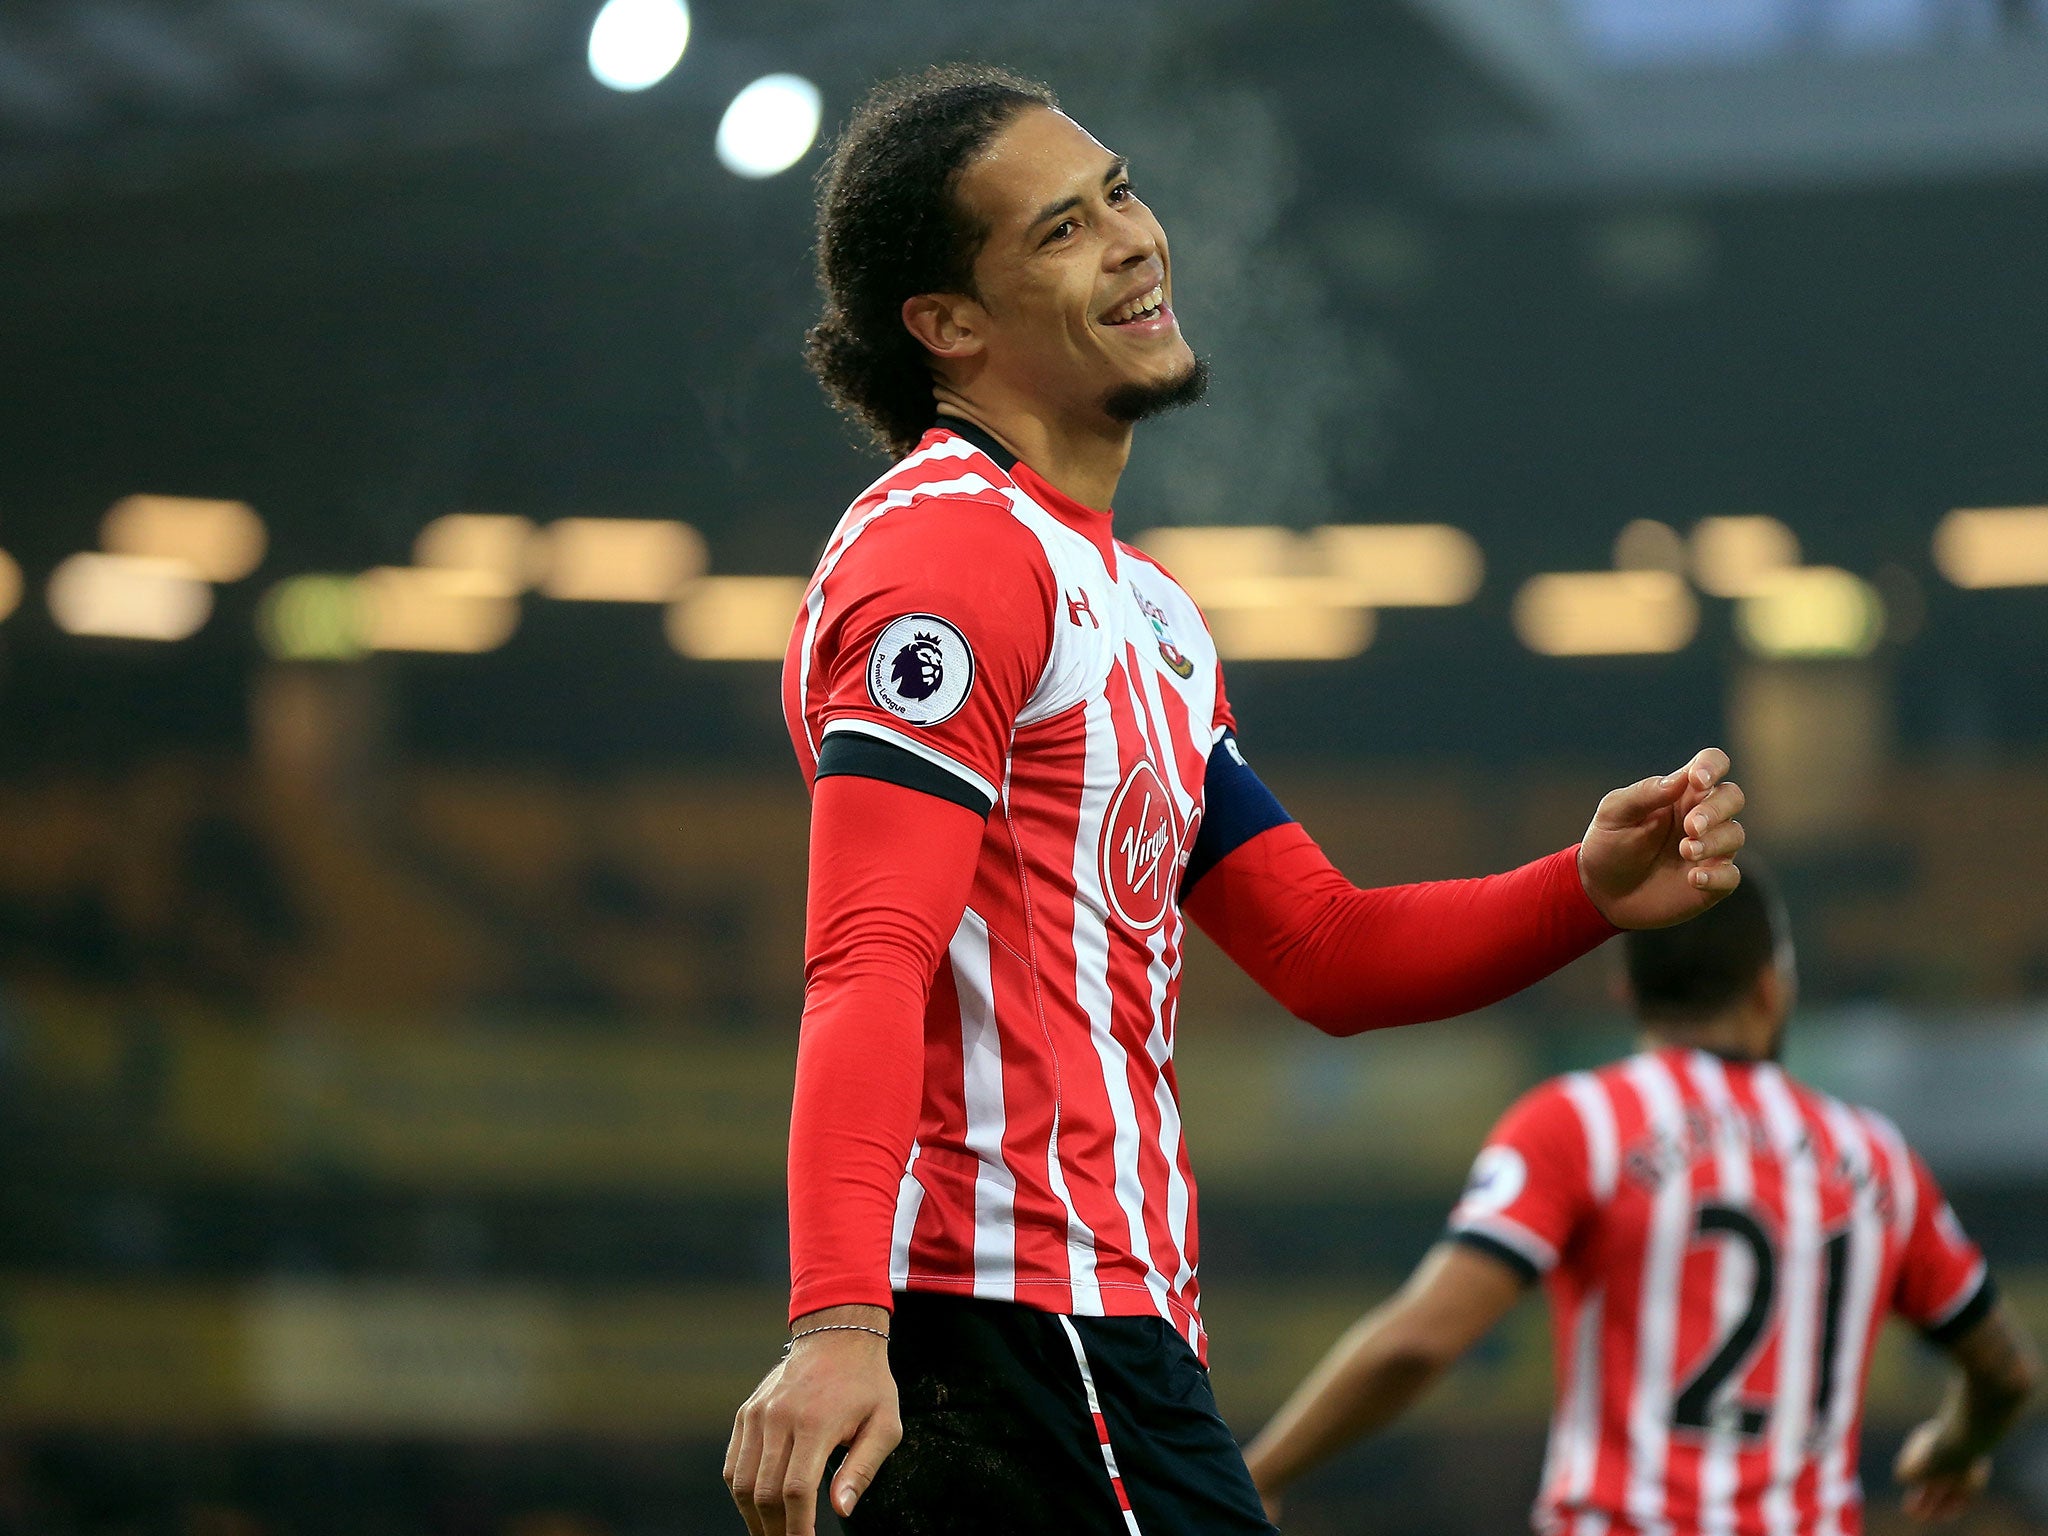 Virgil van Dijk has not played competitively since suffering a foot ligament injury against Leicester in January